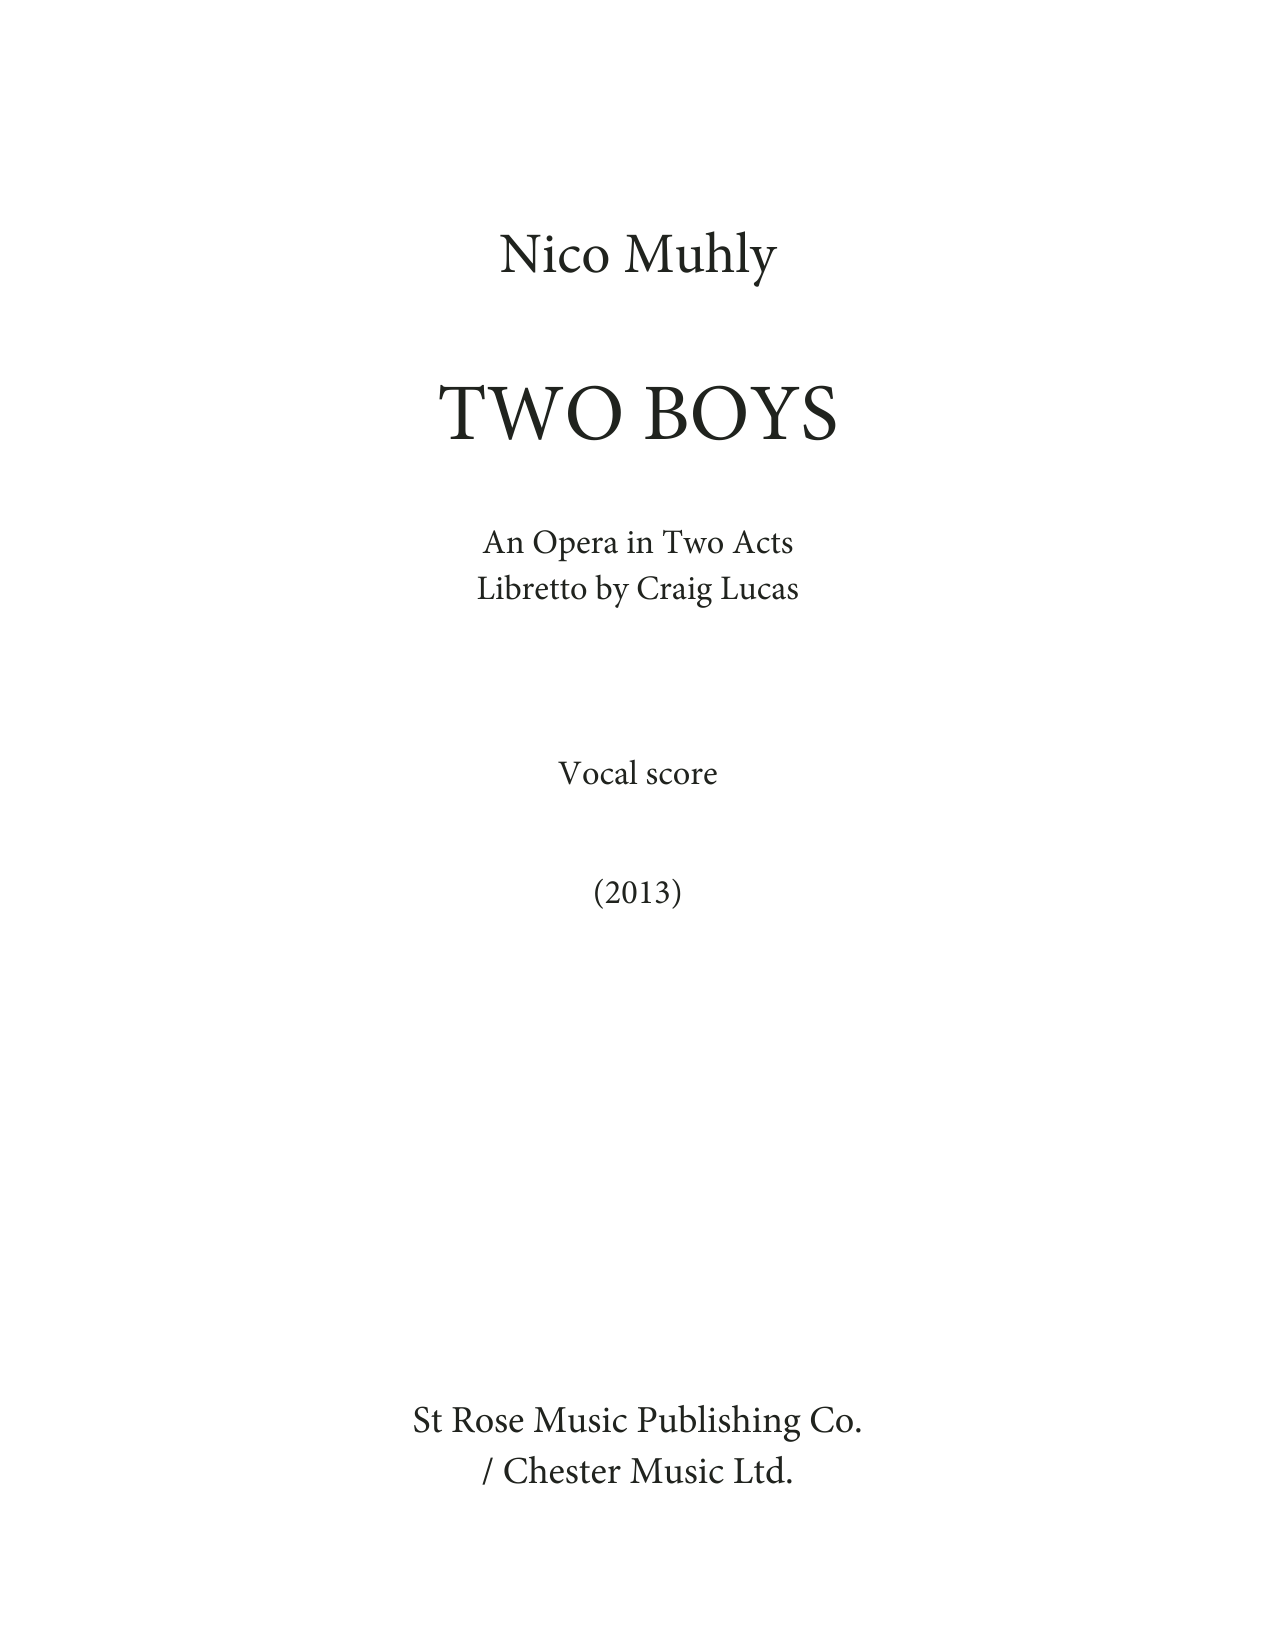 Download Nico Muhly Two Boys Sheet Music